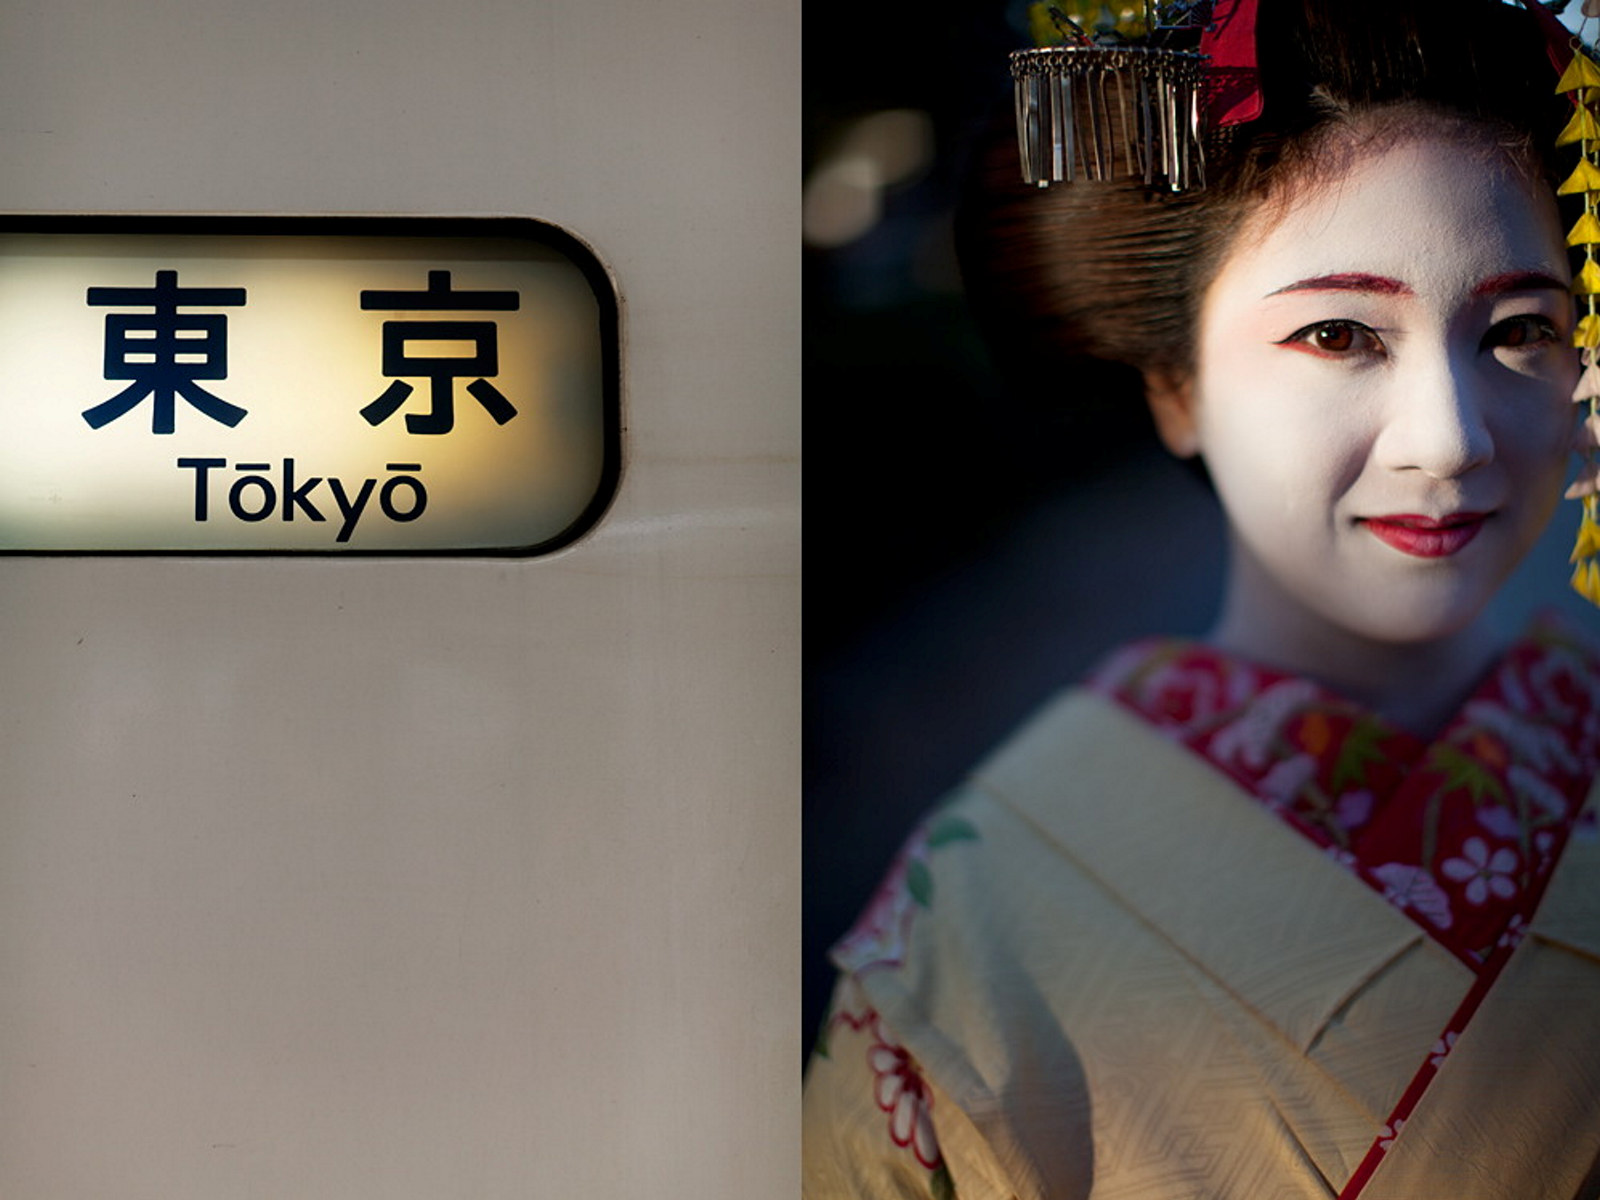 Juxtaposed images: left hand side is of illuminated sign (Toyko) and right hand side is of Japanese lady dressed as a geisha.